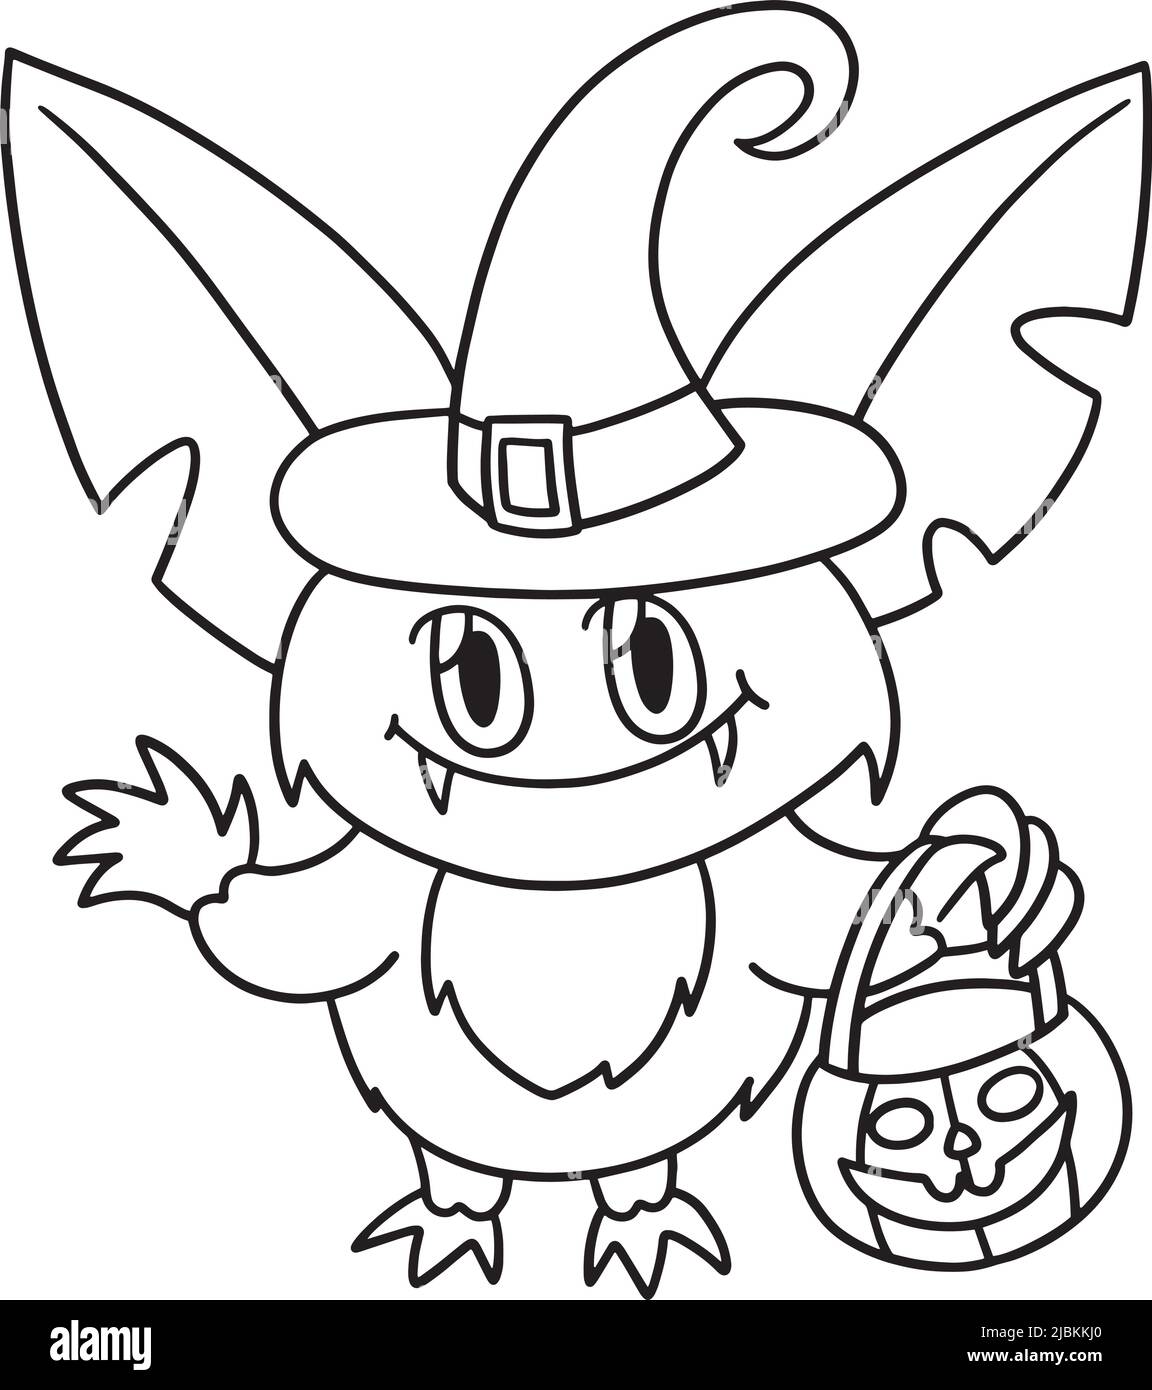 Vampire Owl Halloween Isolated Coloring Page  Stock Vector